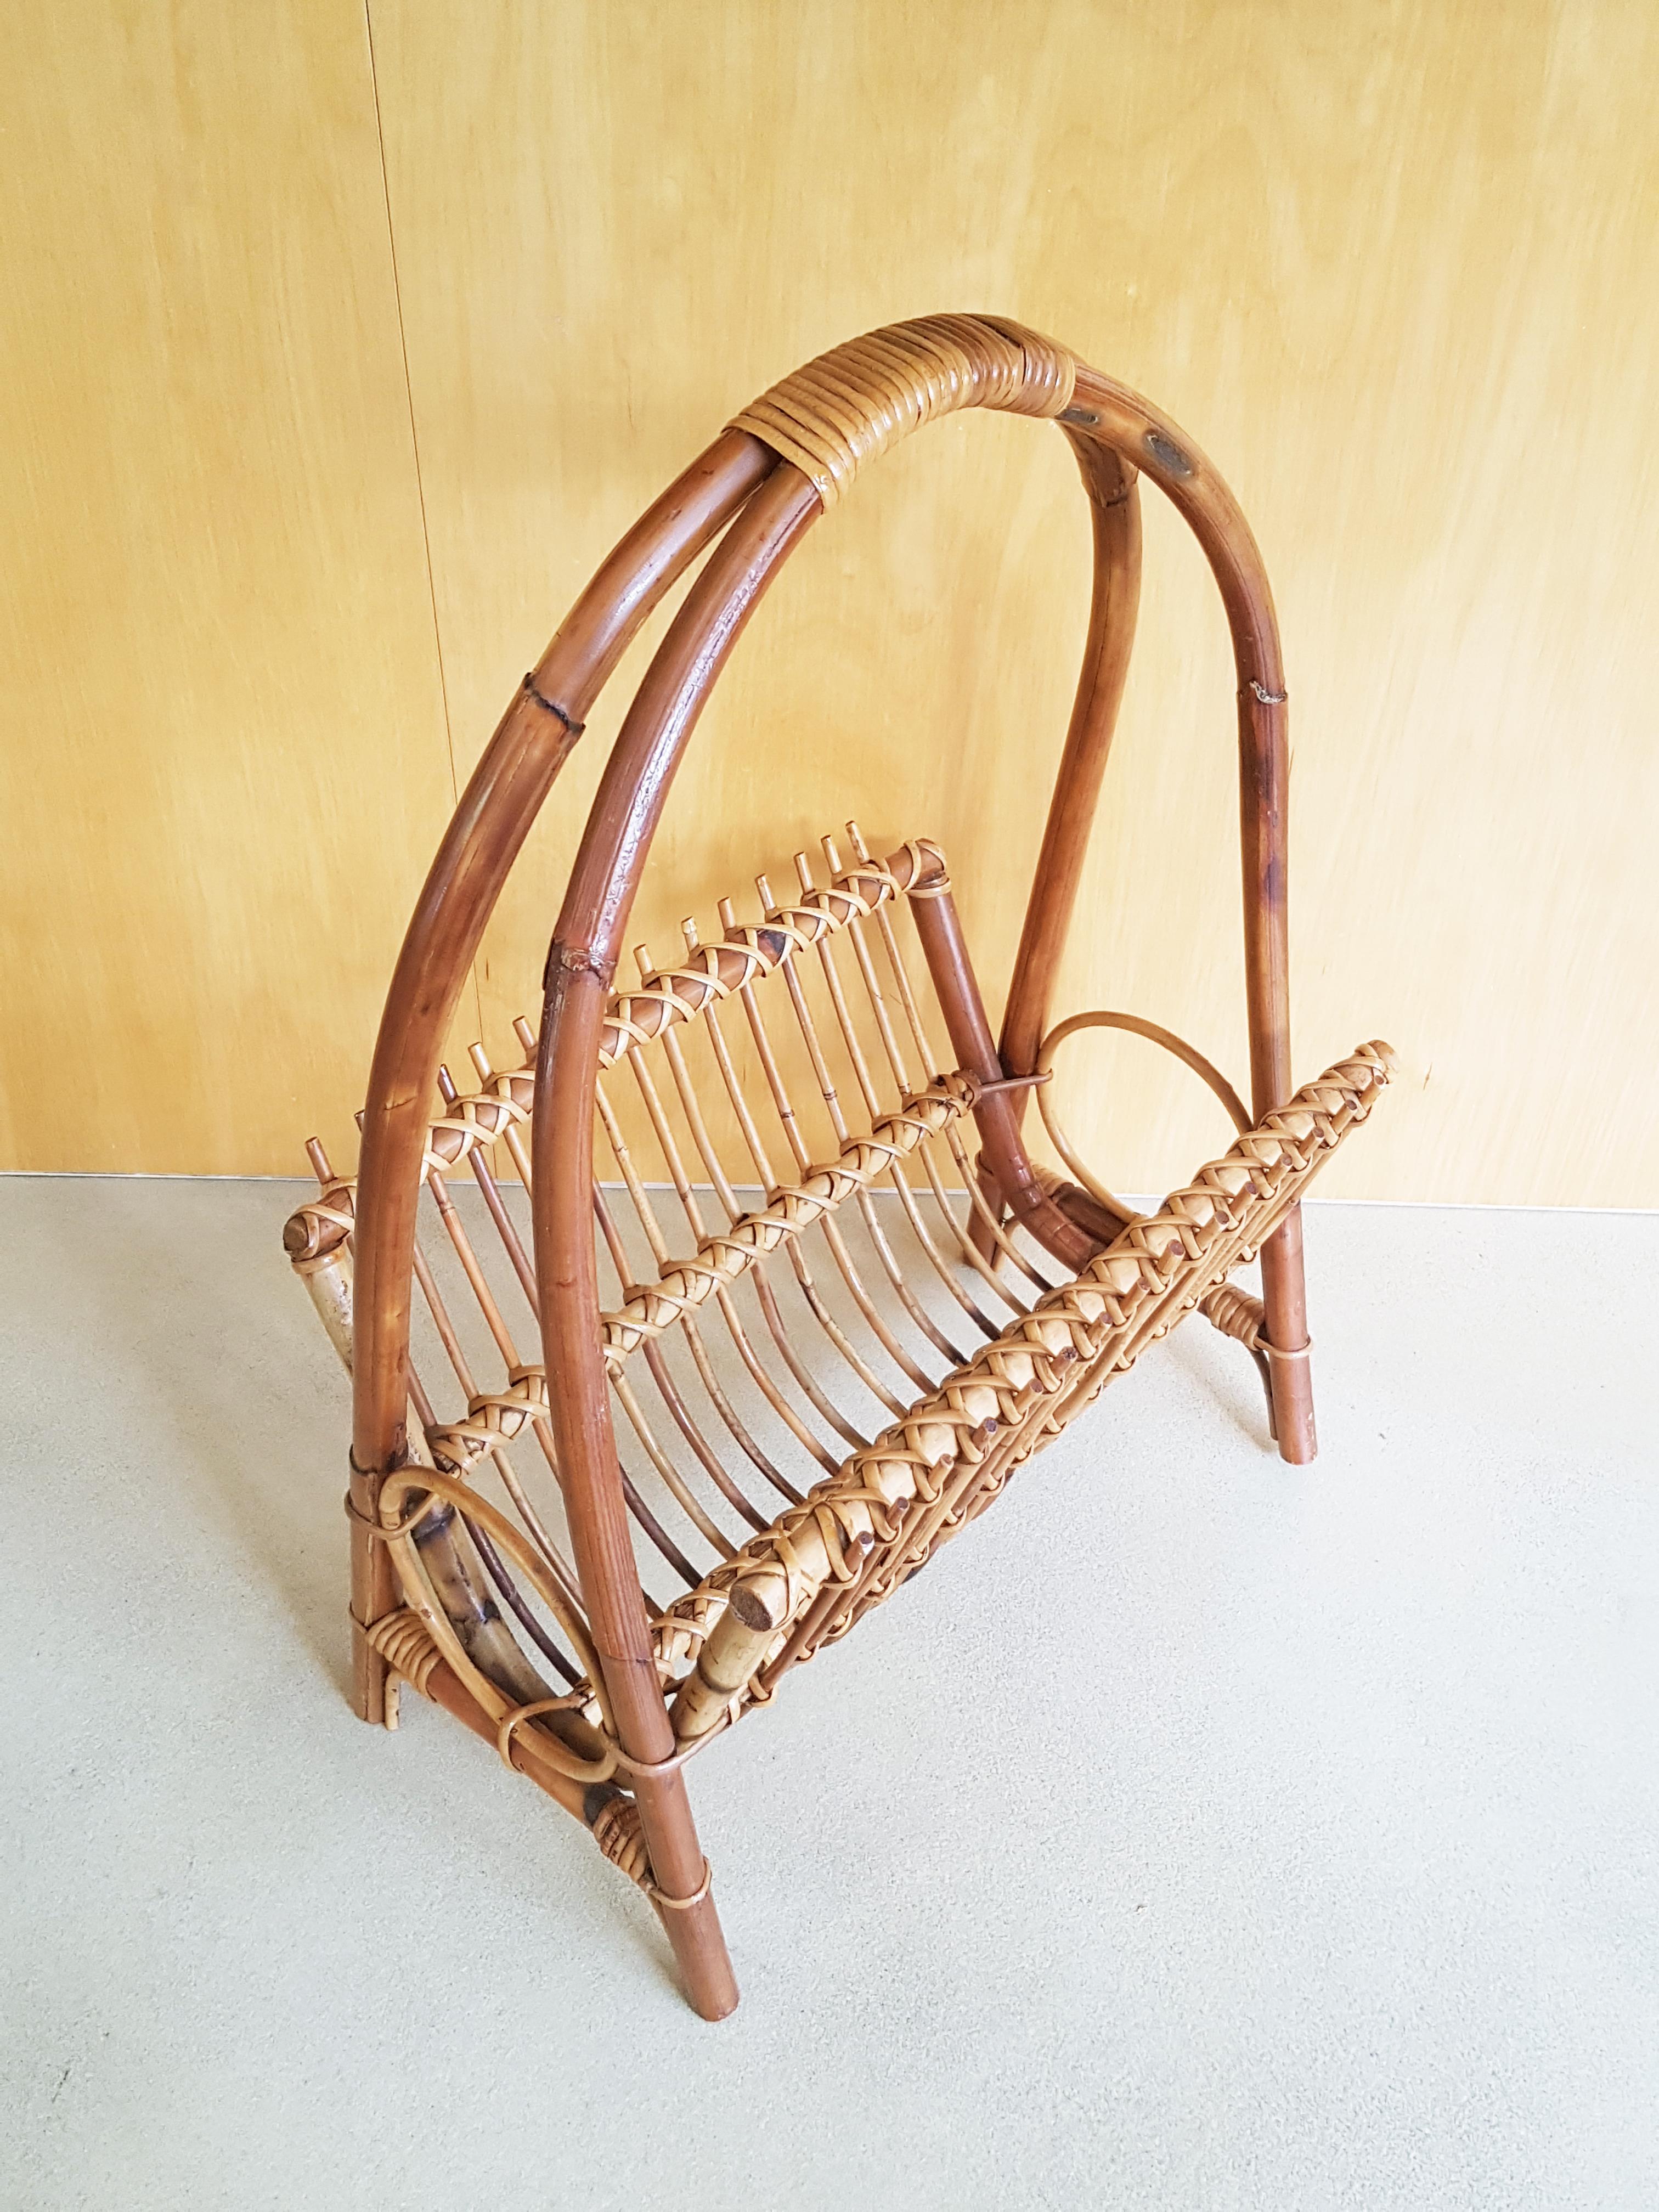 Rush and rattan magazine rack with high handle. Very good vintage condition.